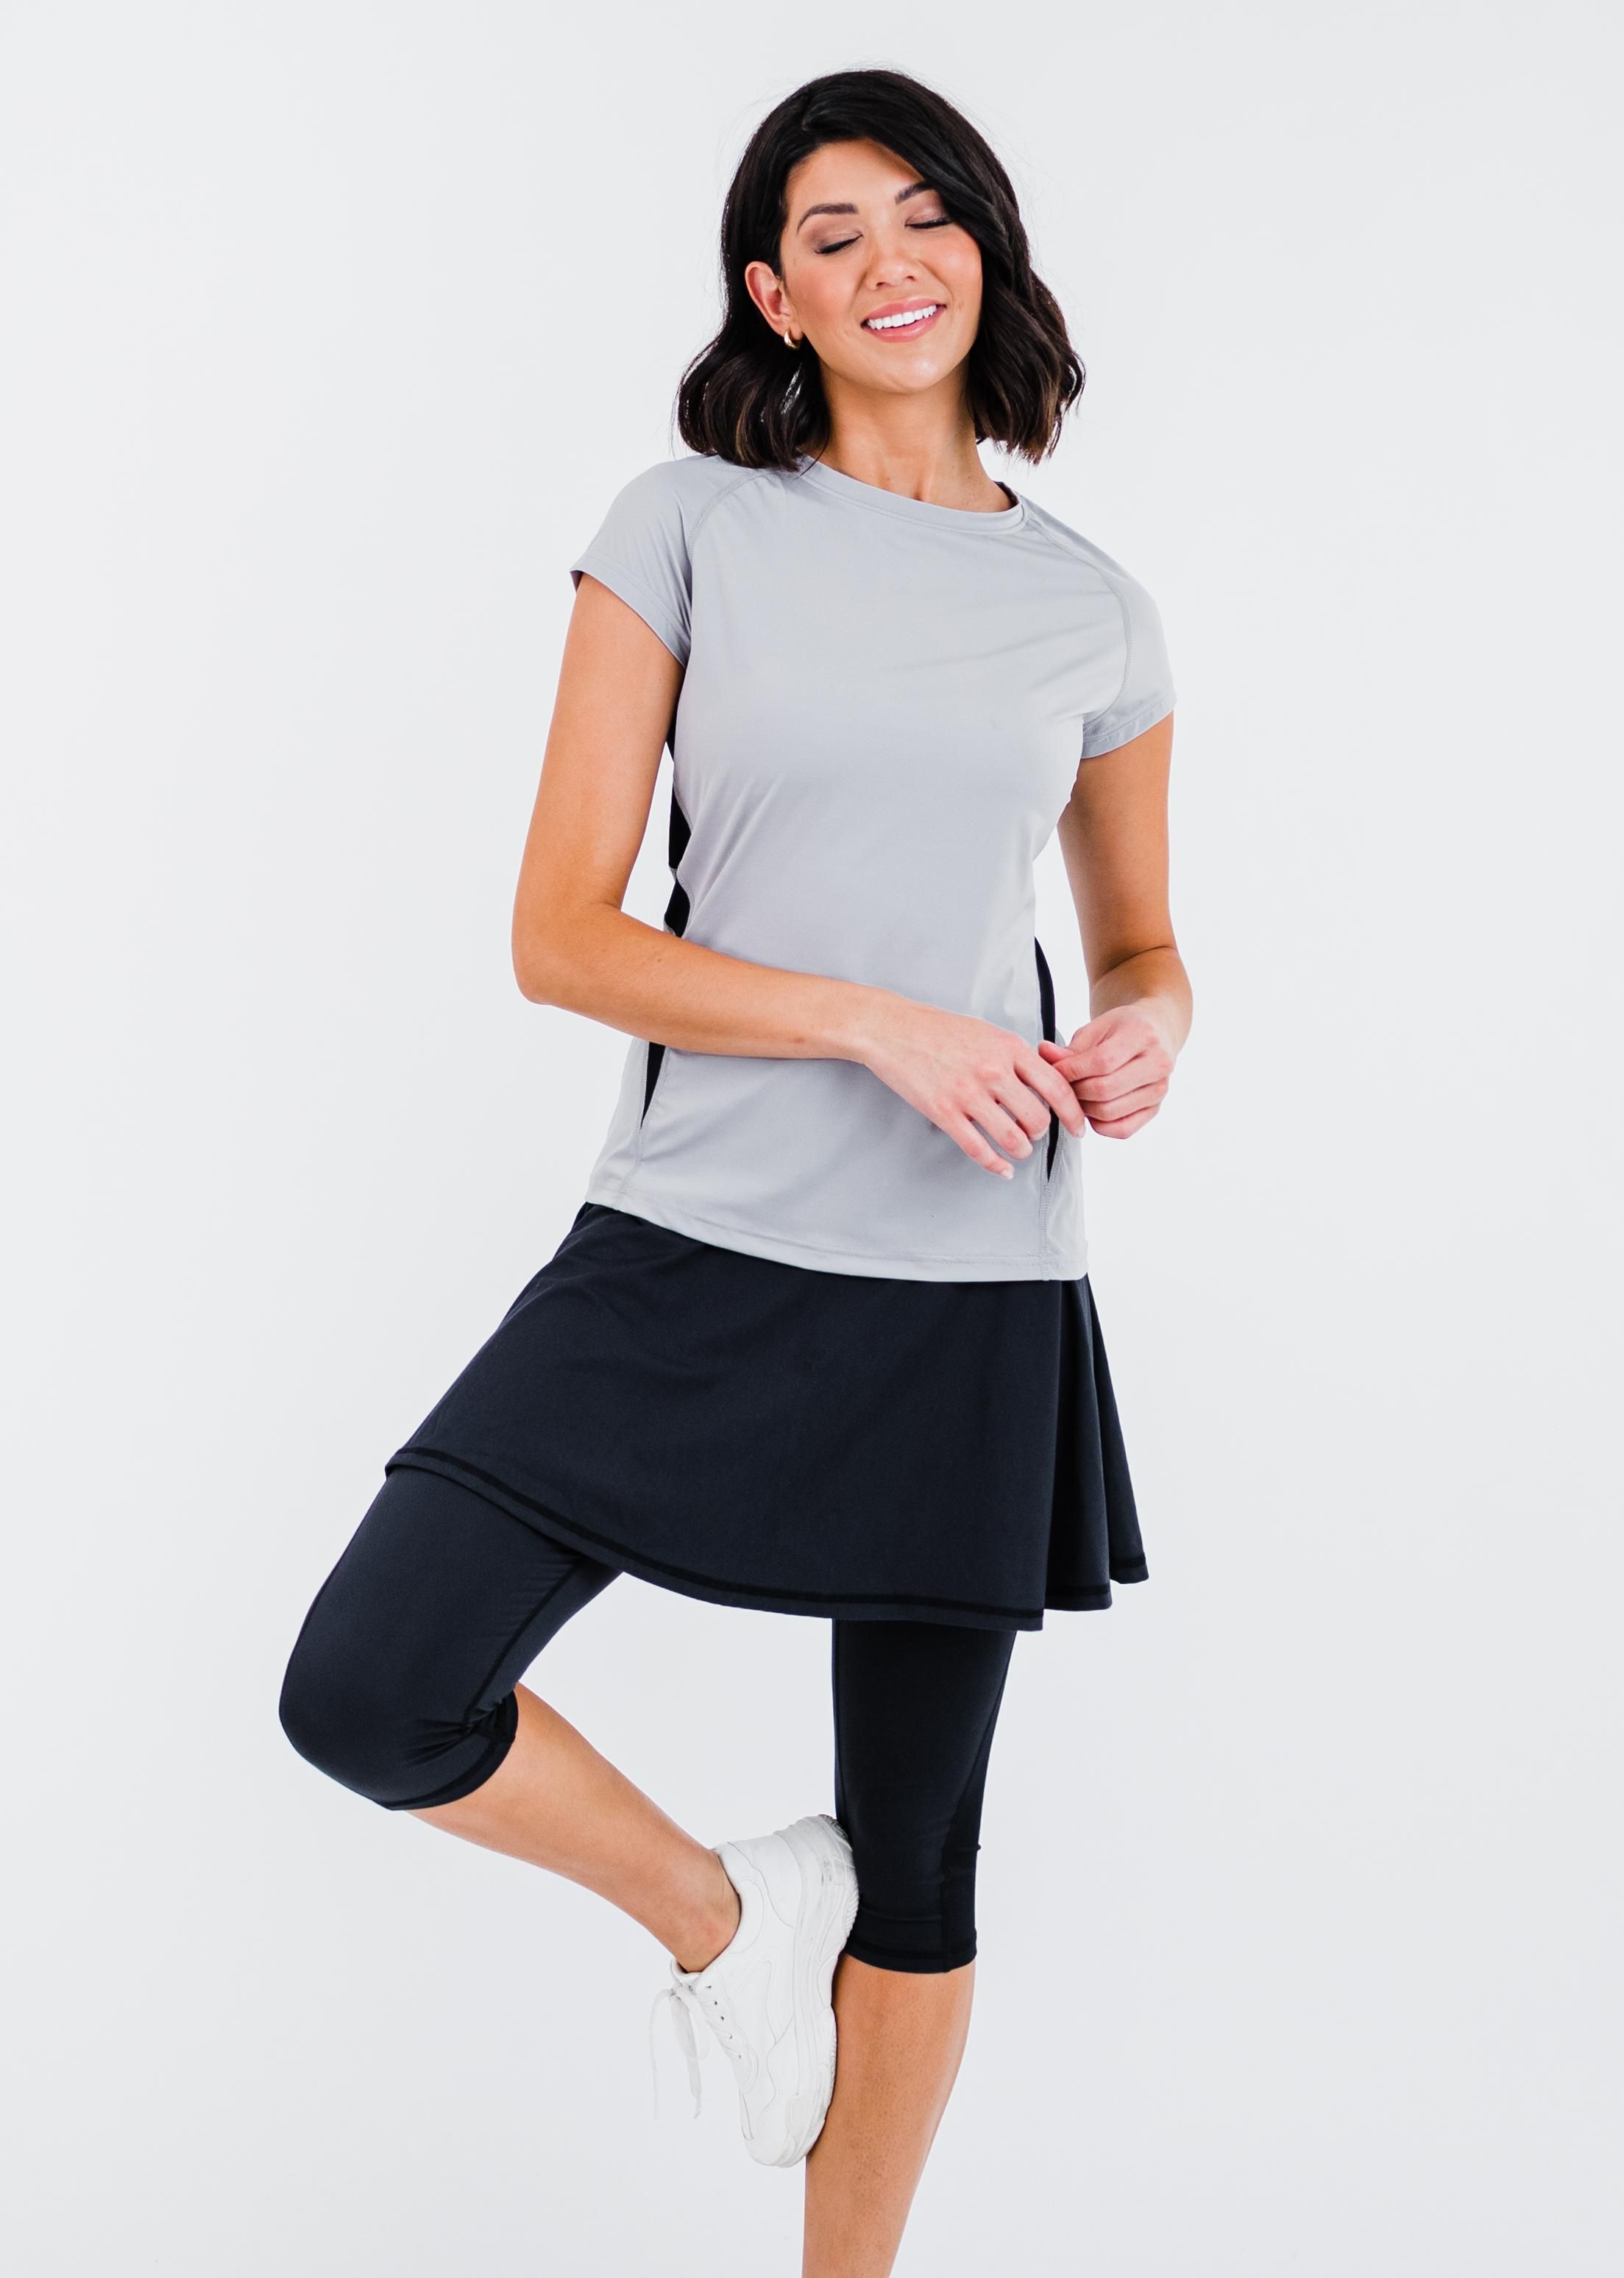 Pro Cap Sleeve Performance Top With Mesh Panels With Flowy Lycra® Sport Skirt With Attached 17" Leggings